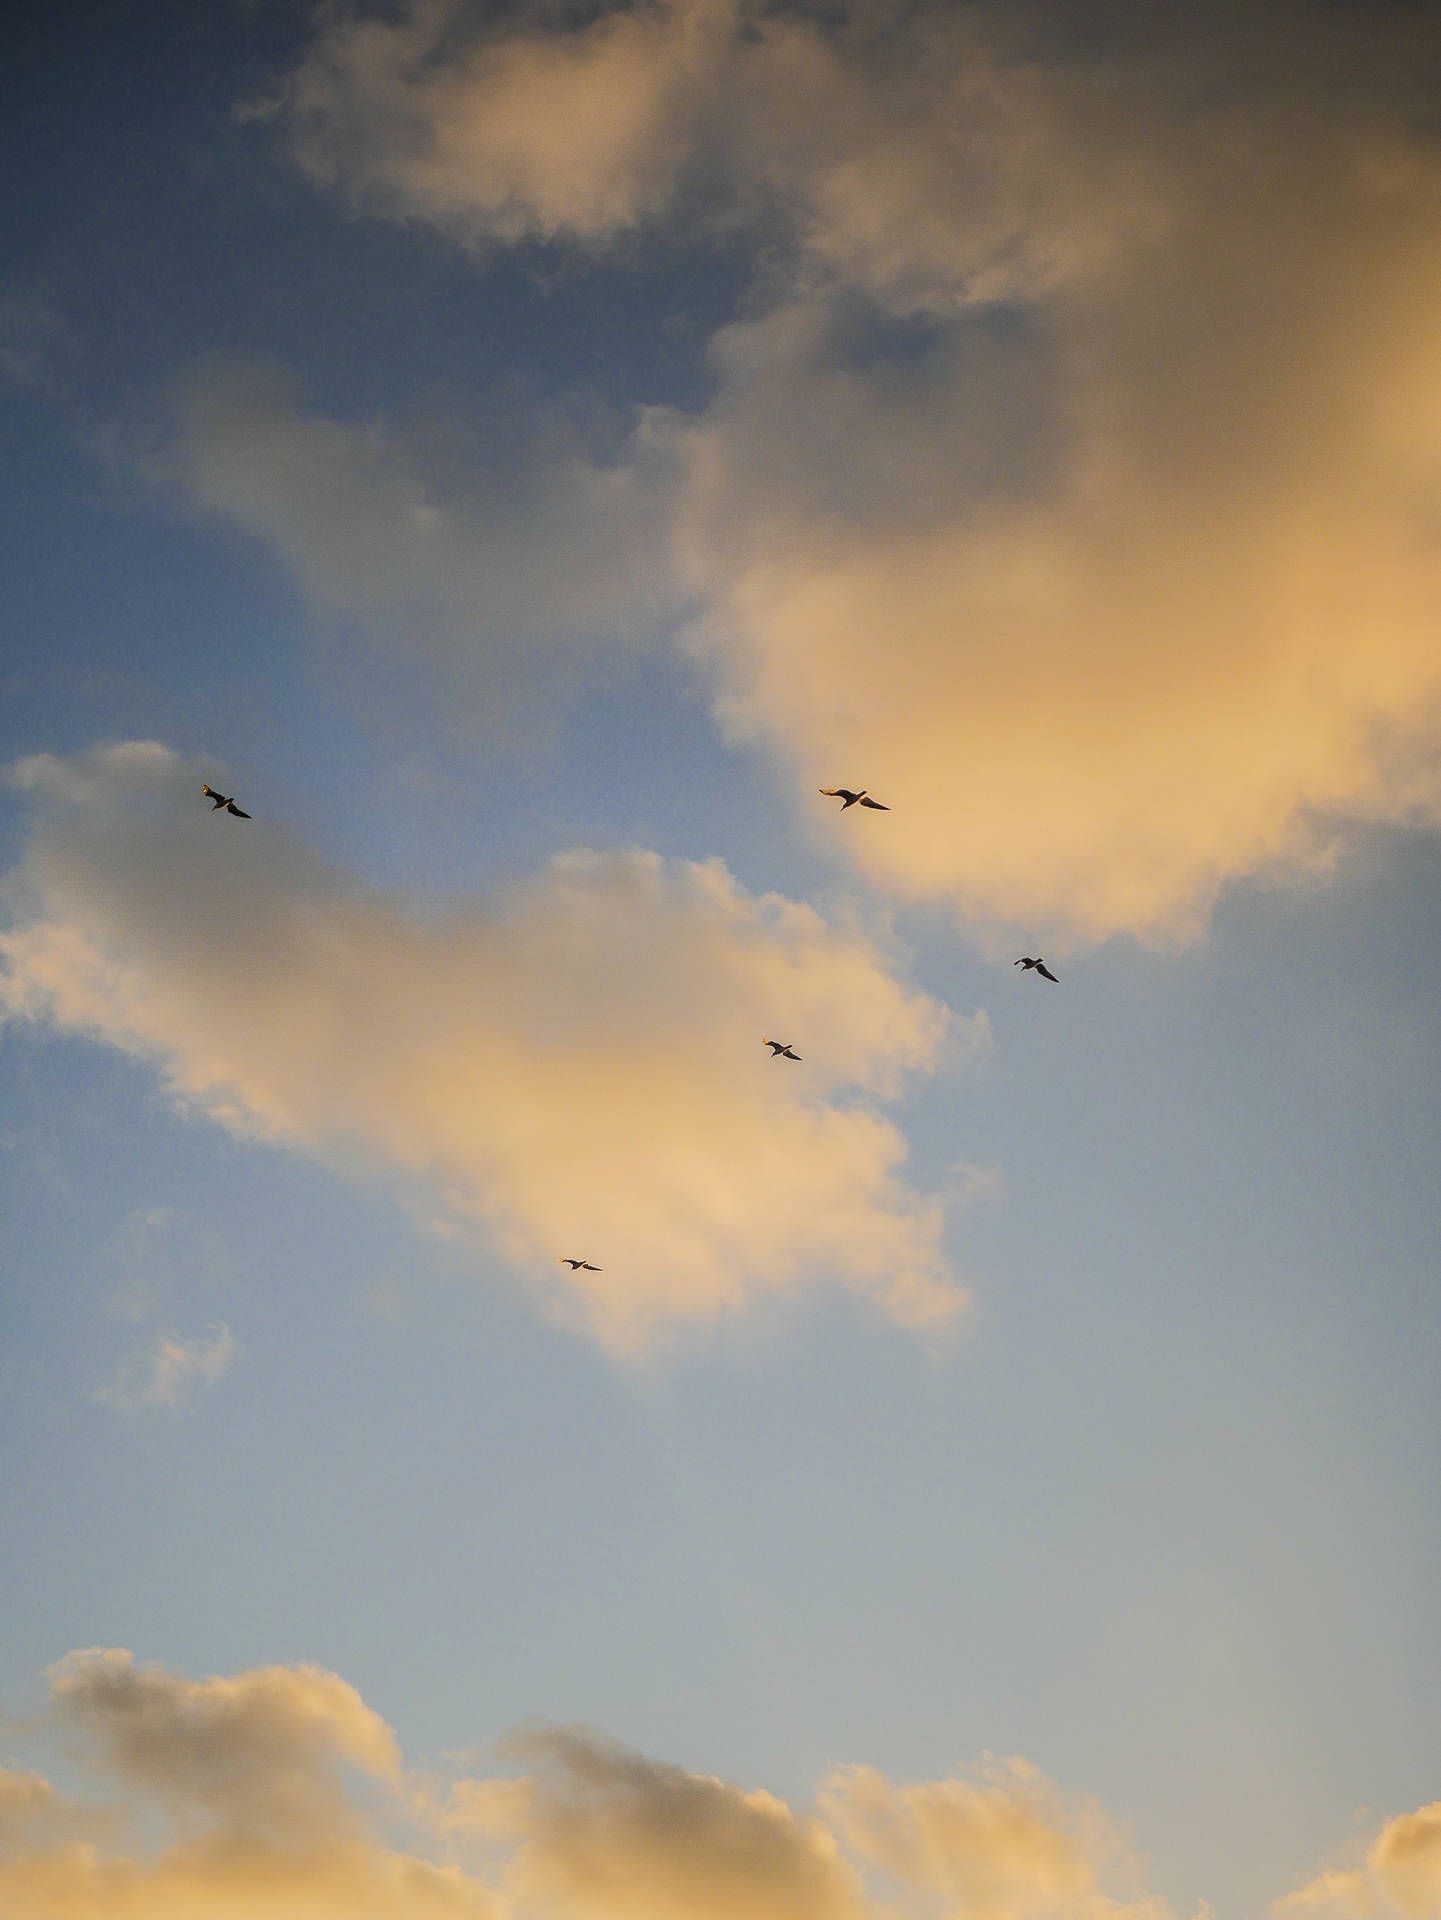 A flock of birds flying in the sky - Vintage clouds